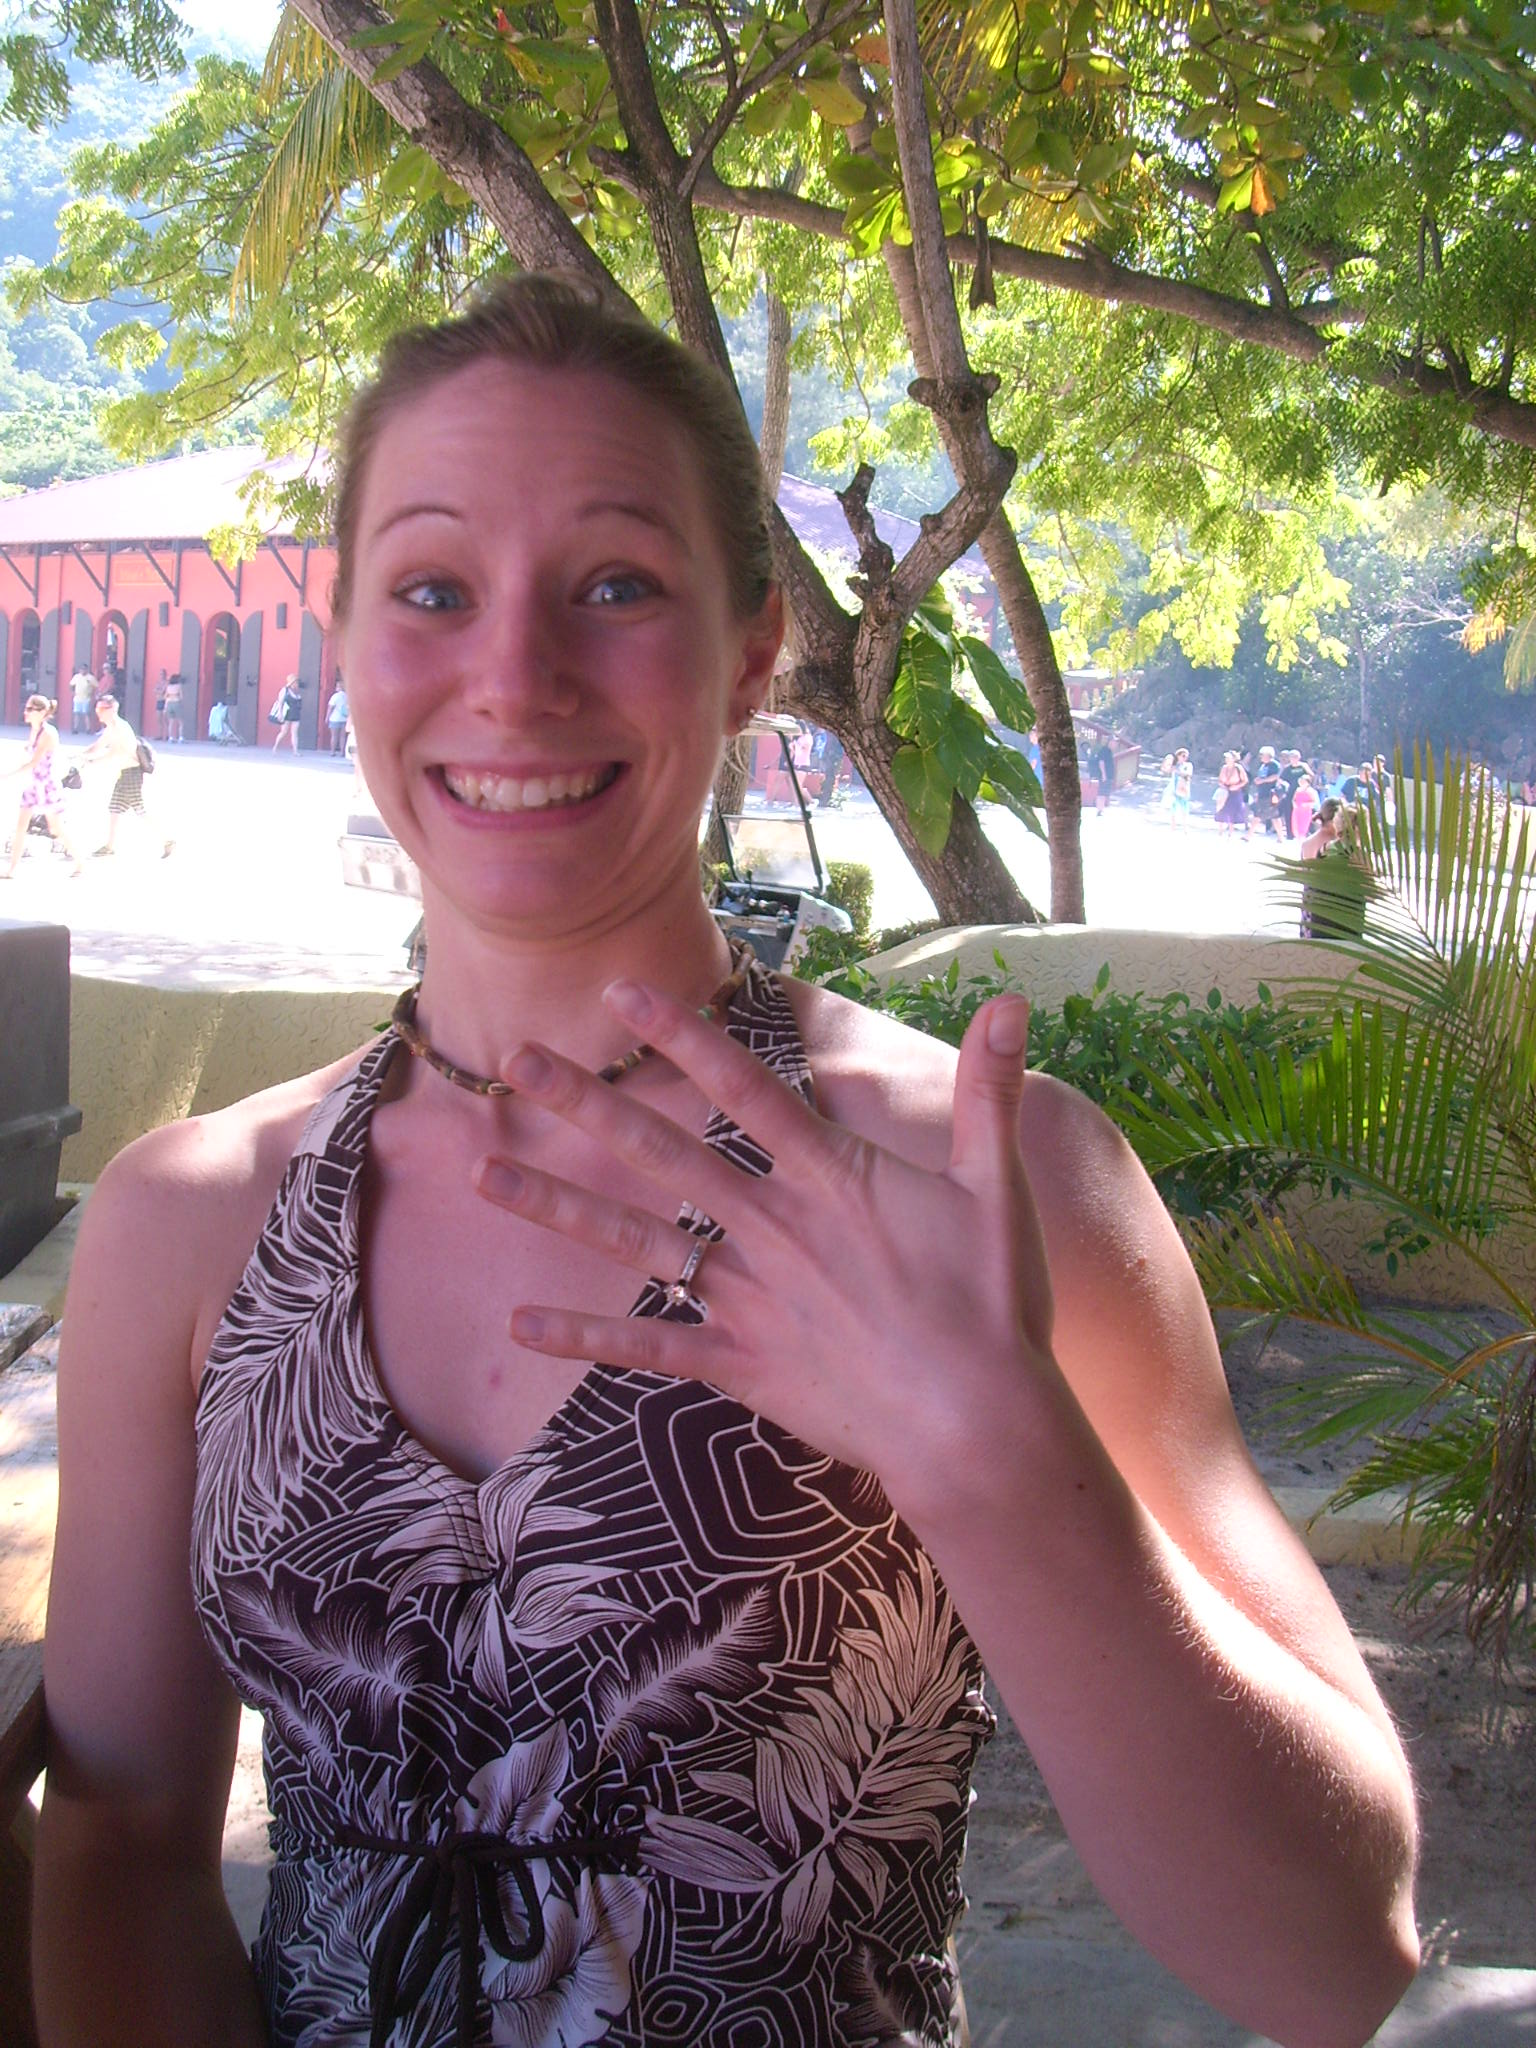 Girl excitedly holds up her diamond ring after getting engaged